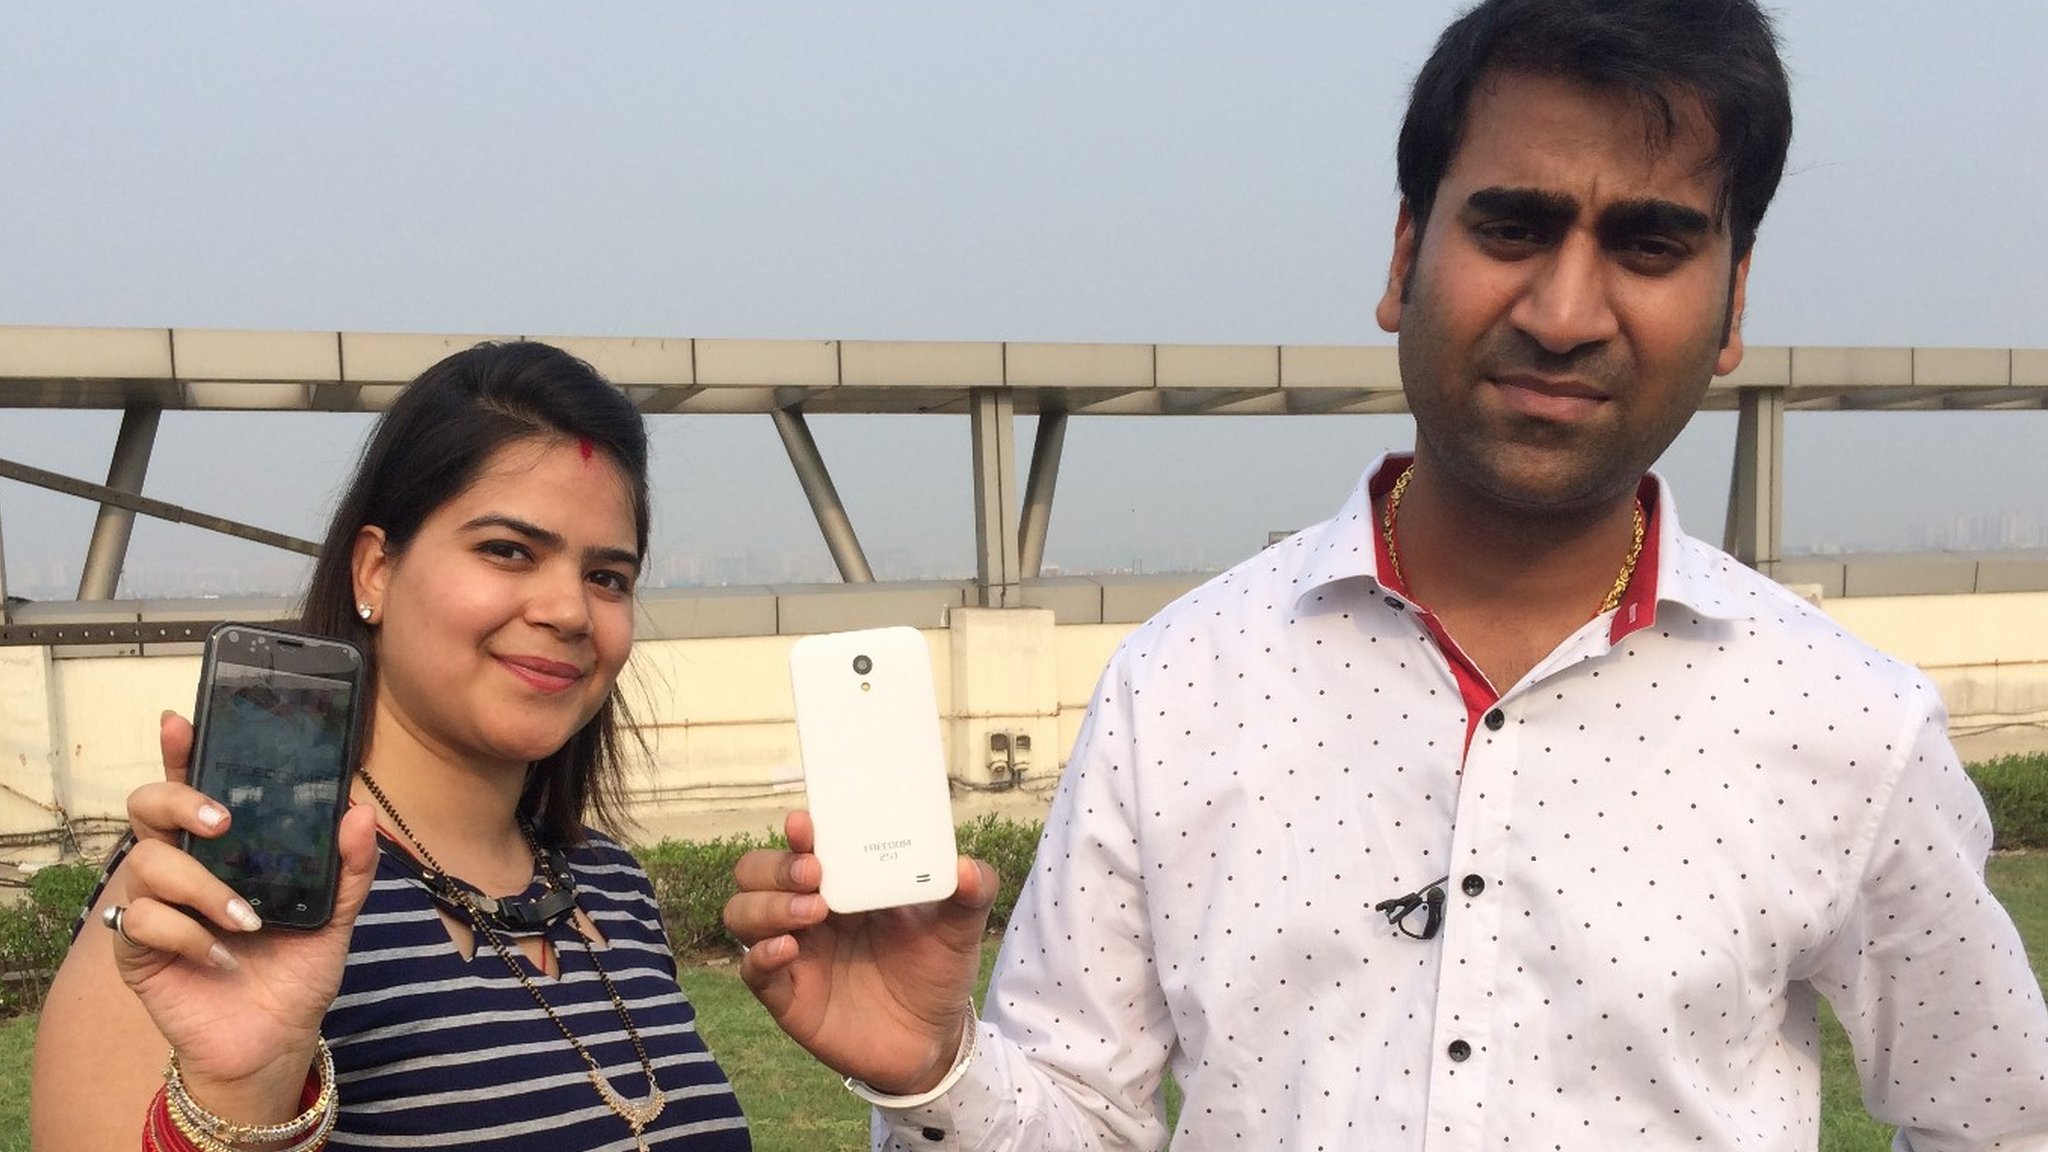 Ringing Bells Says the Freedom 251 Smartphone Is Not a Scam!